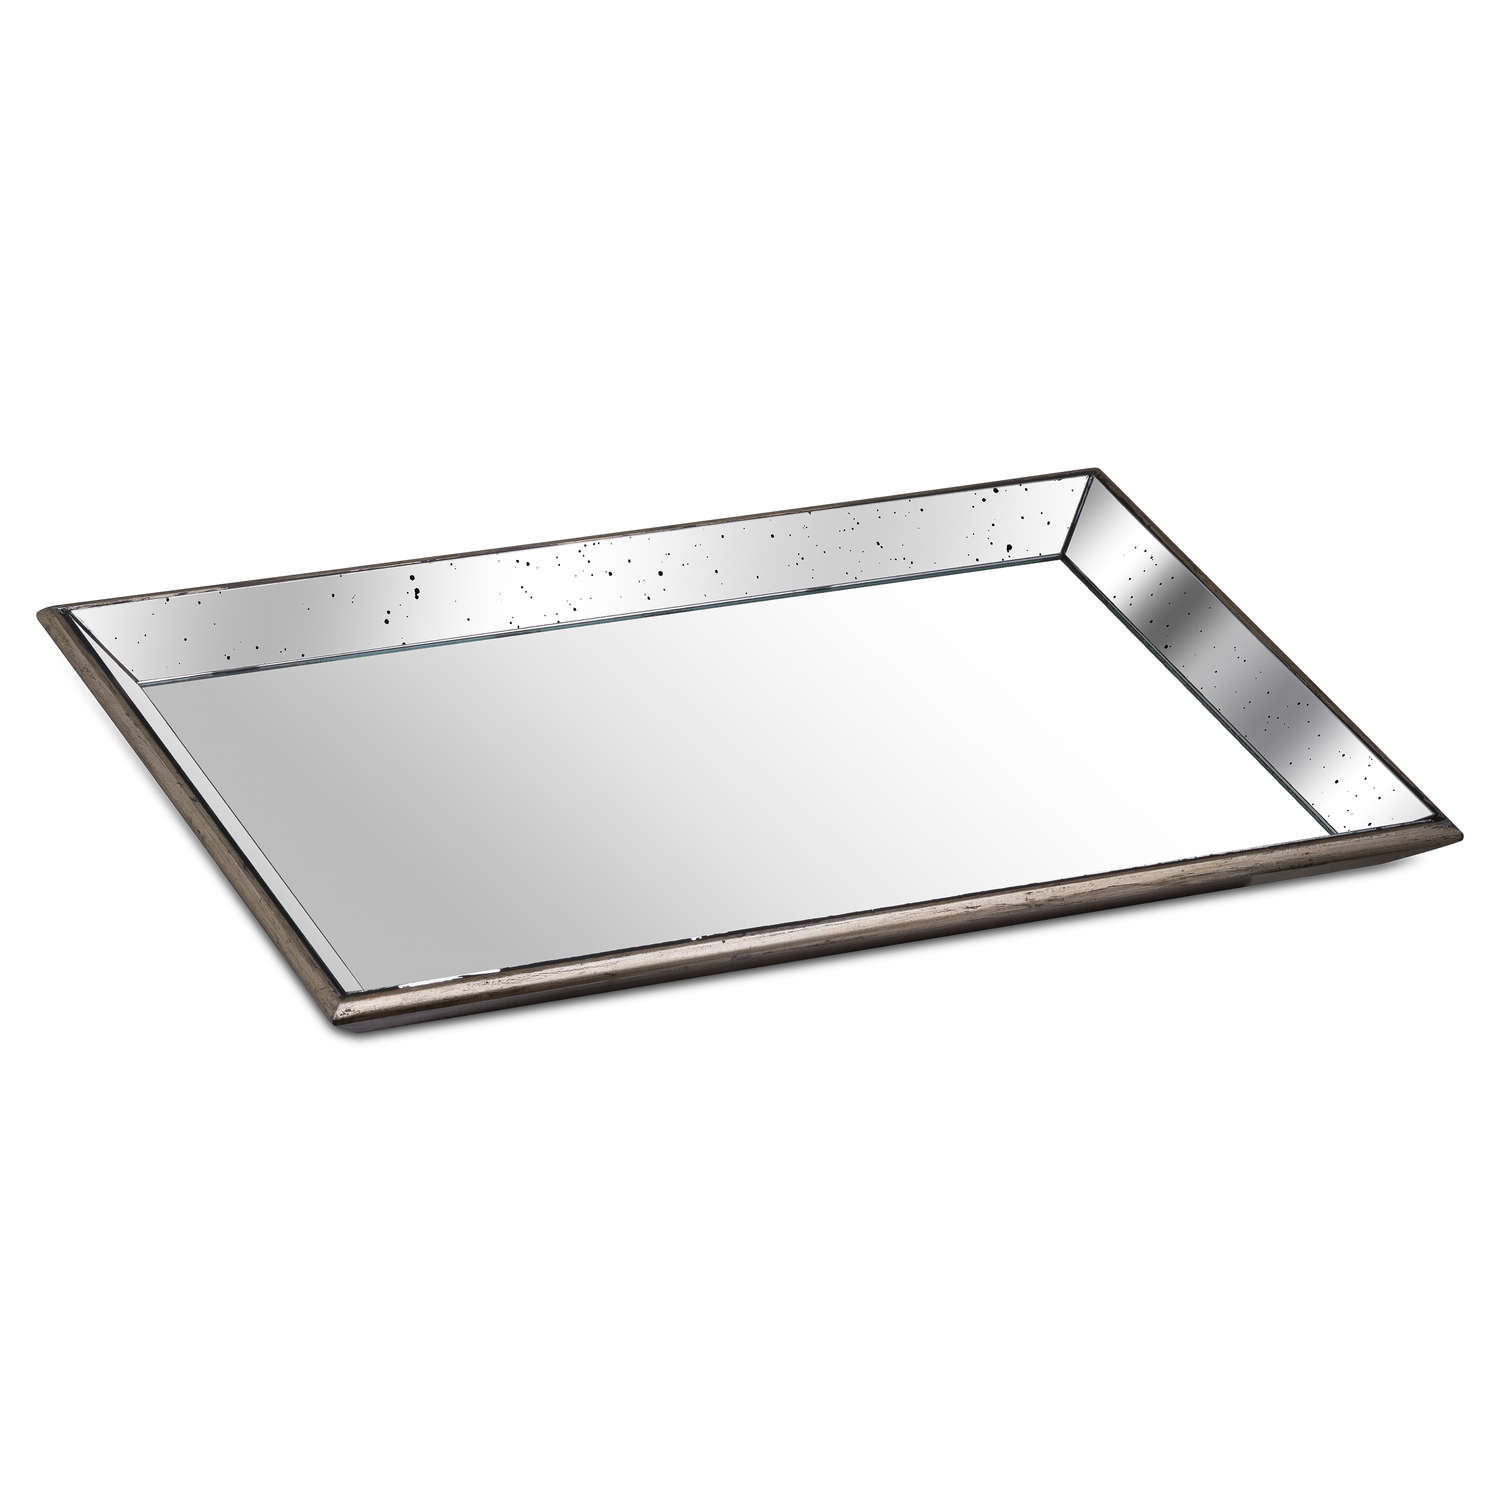 Astor Distressed Large Mirrored Tray With Wooden Detailing - Image 1